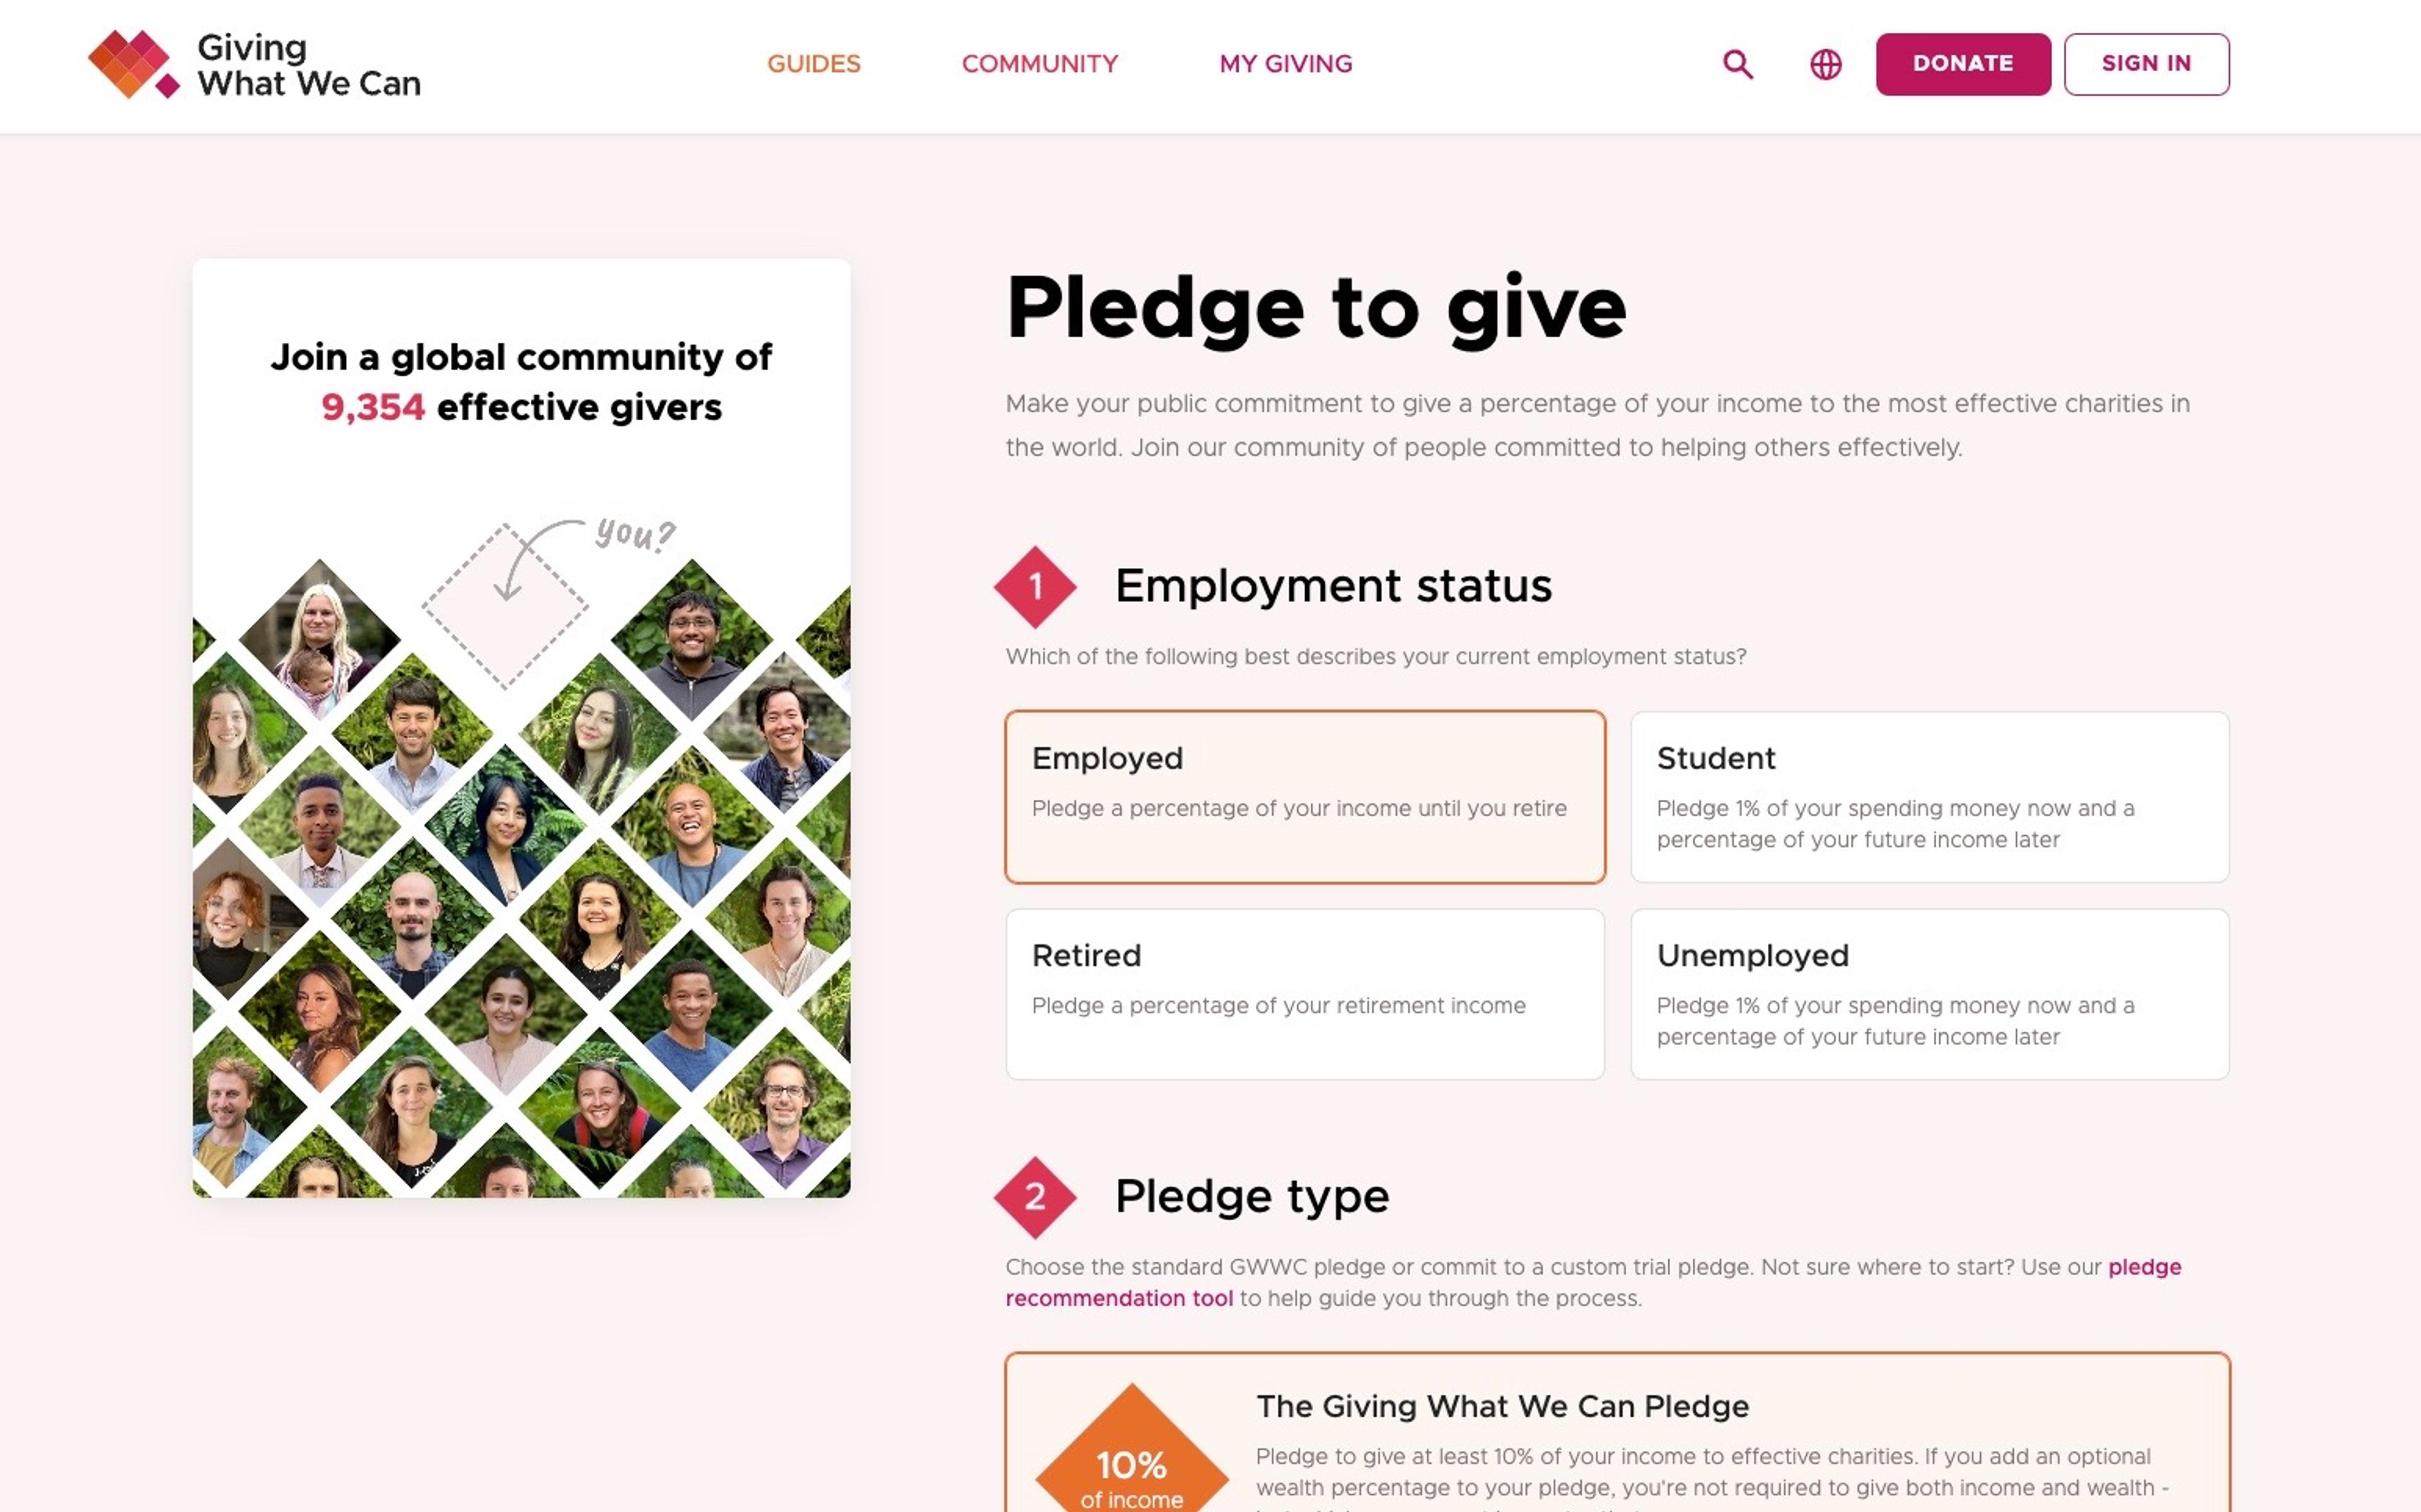 image of the GWWC pledge sign up flow including an quilt of member portraits on the left hand side